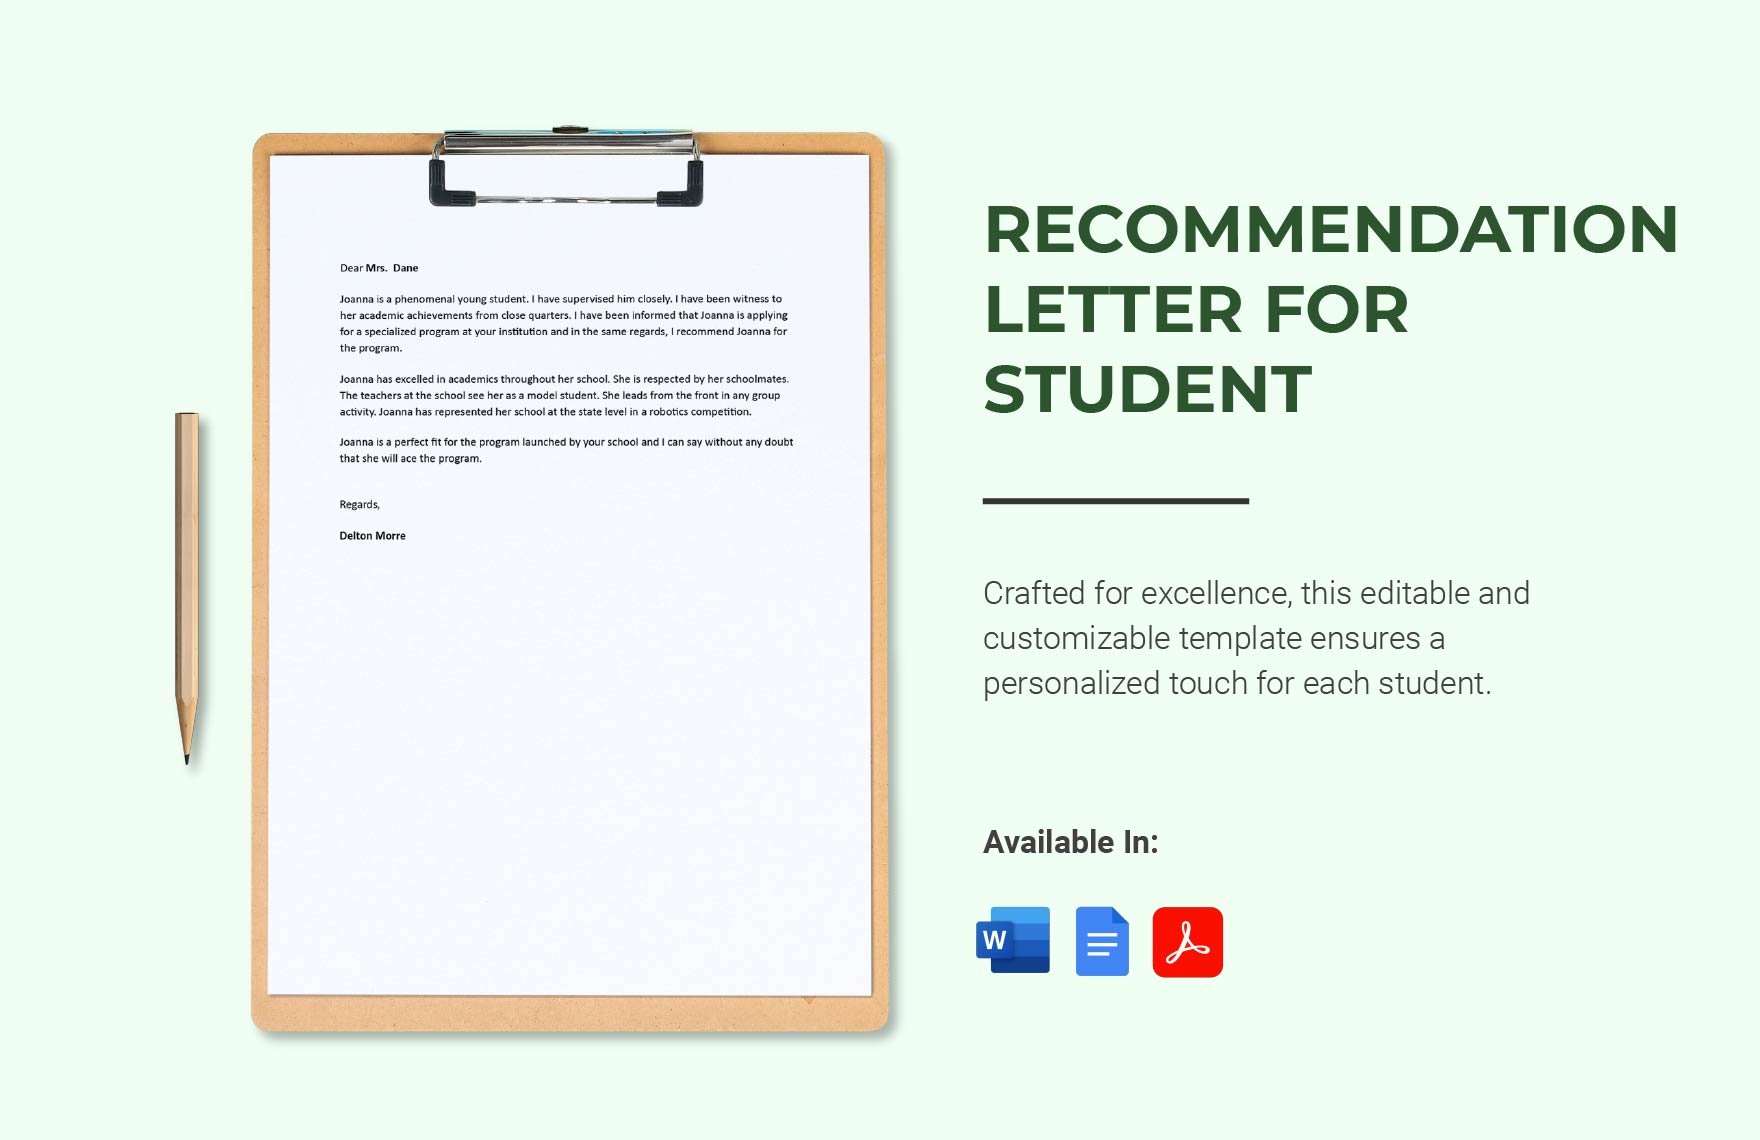 Recommendation Letter for Student